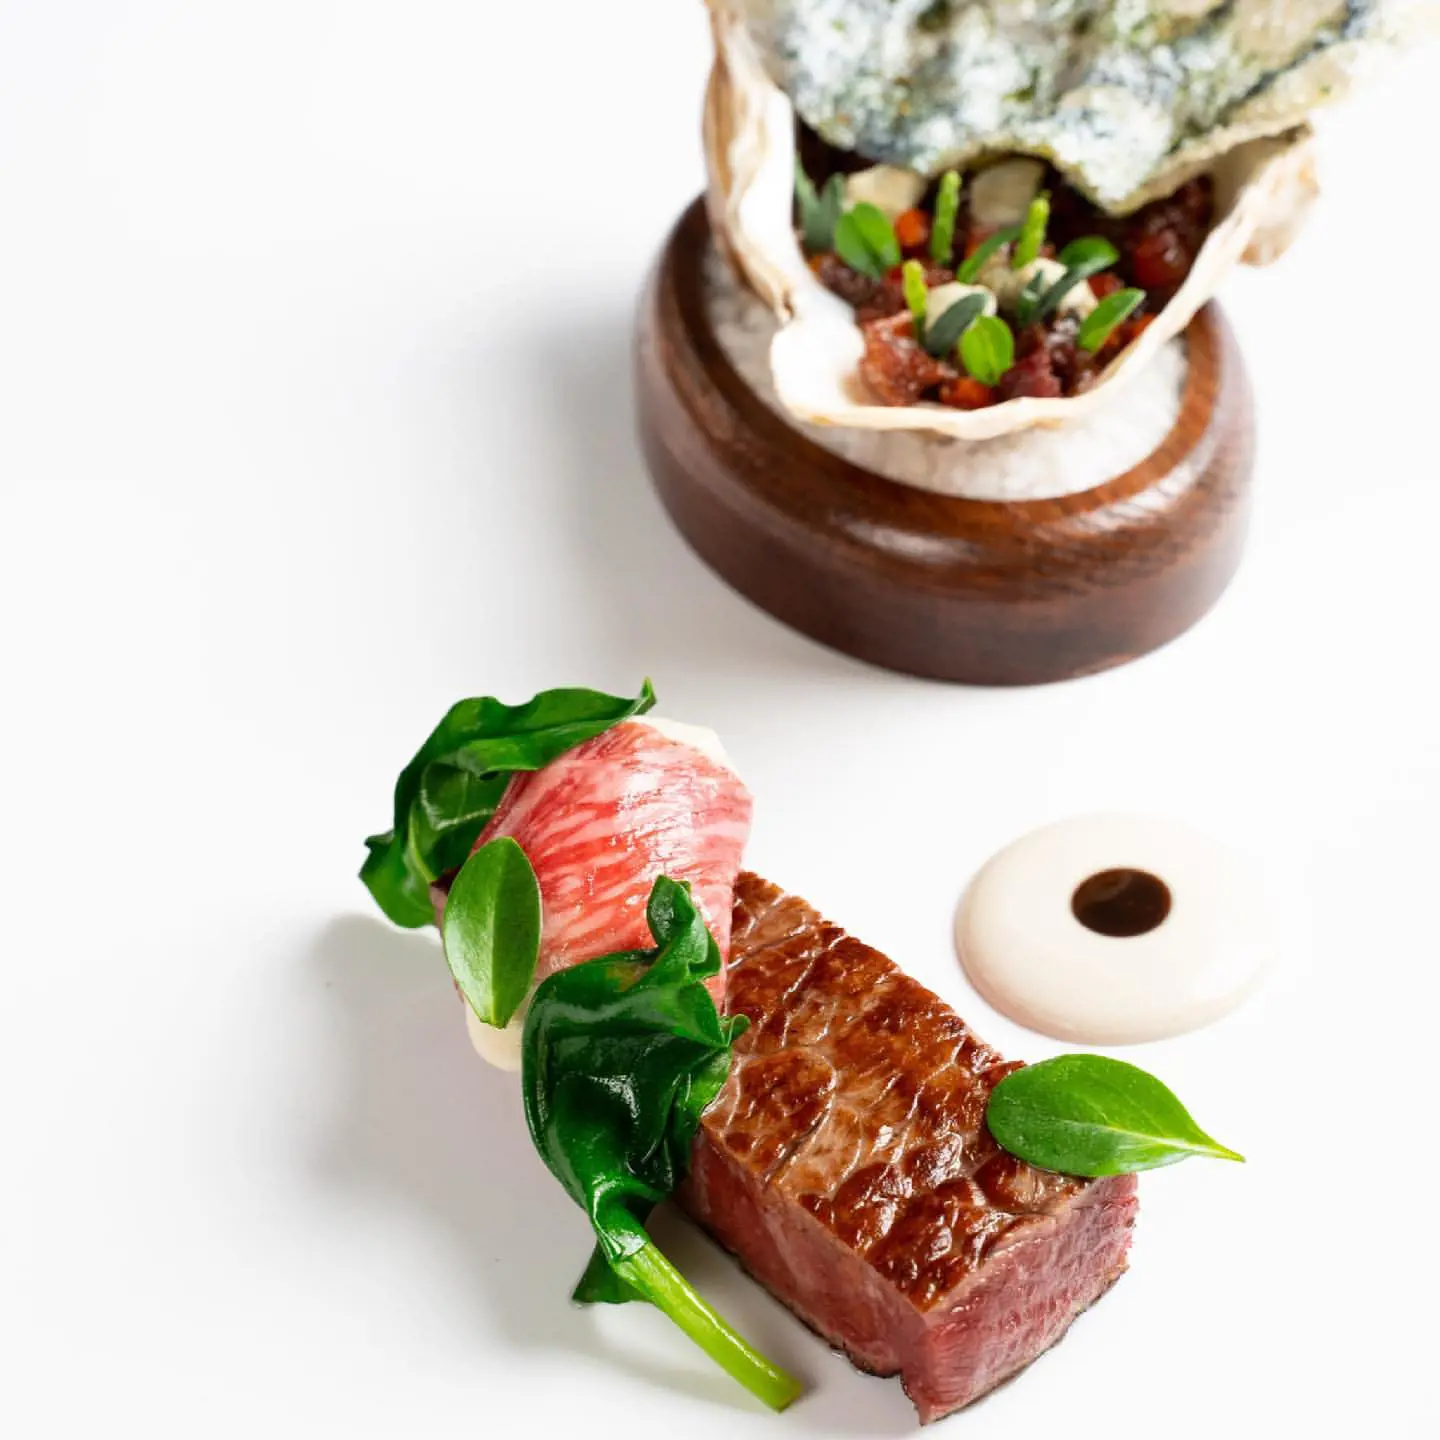 Highland wagyu beef and Porthilly oysters